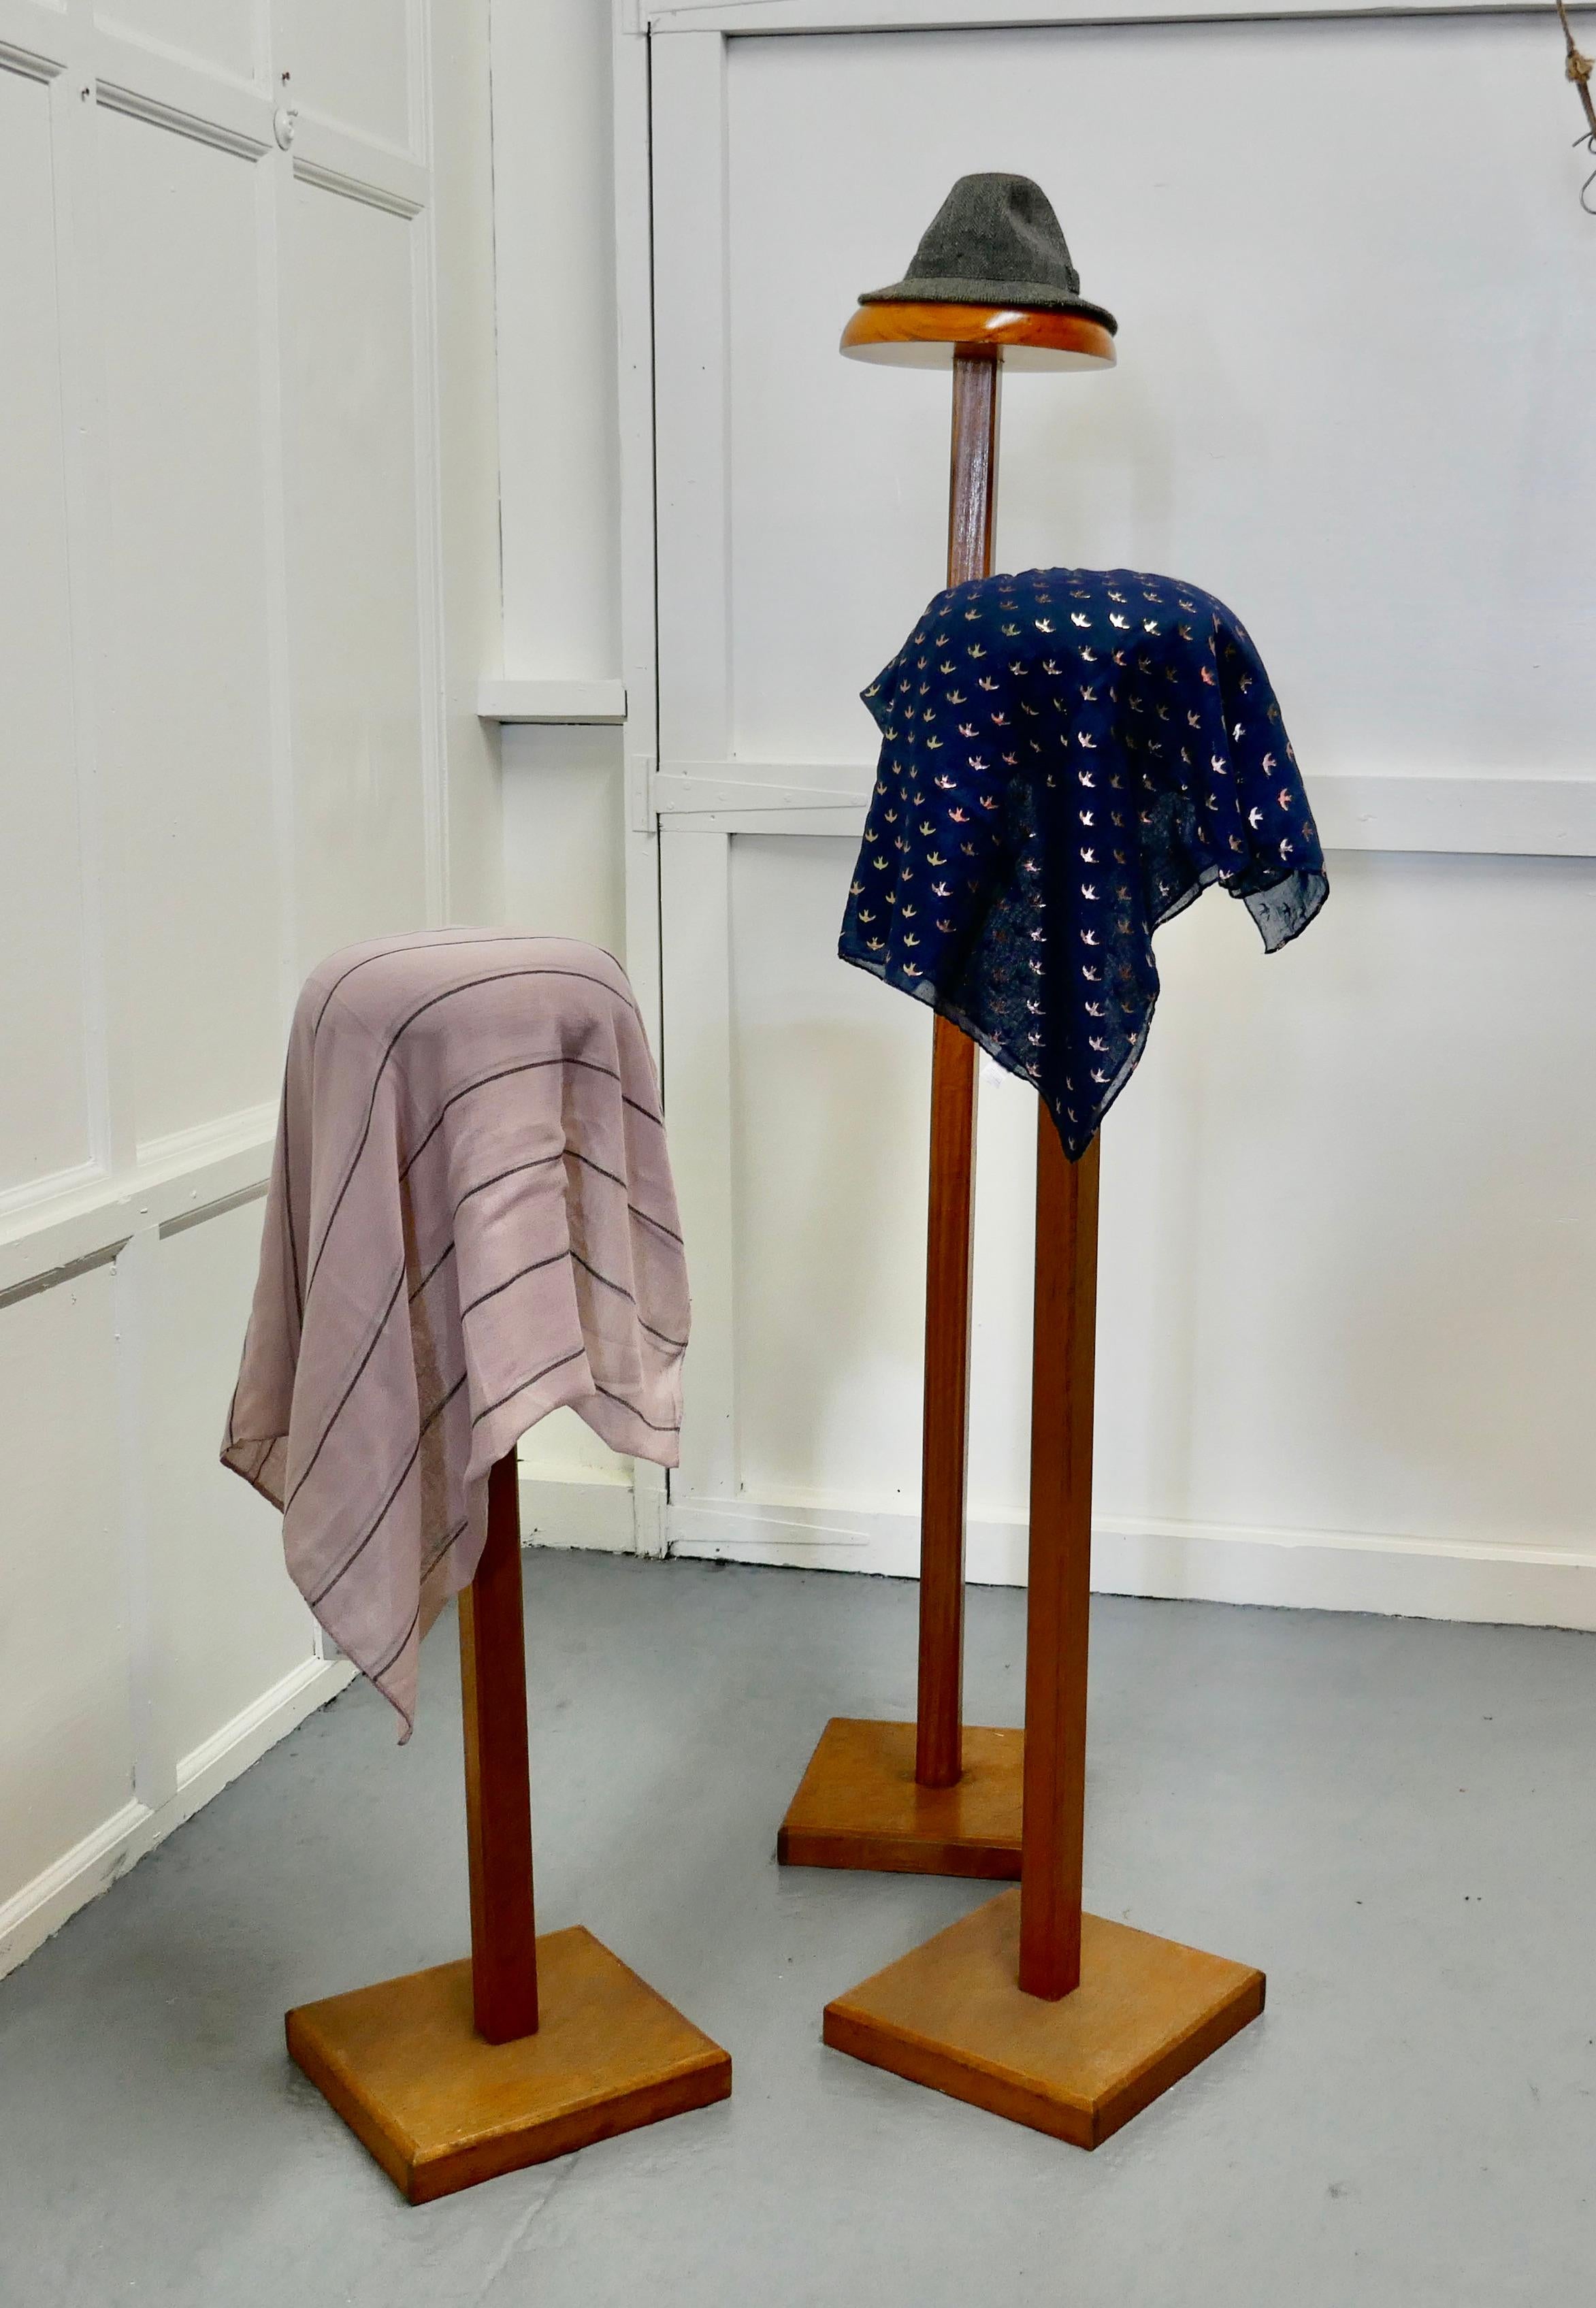 Set of 3 very high Taylor’s wooden fabric display shop stands

A superb set of stands used for displaying and draping suit fabrics on

The stands are made in beech, the tallest one is 67” tall, then 54” tall and 42” for the smaller one the solid